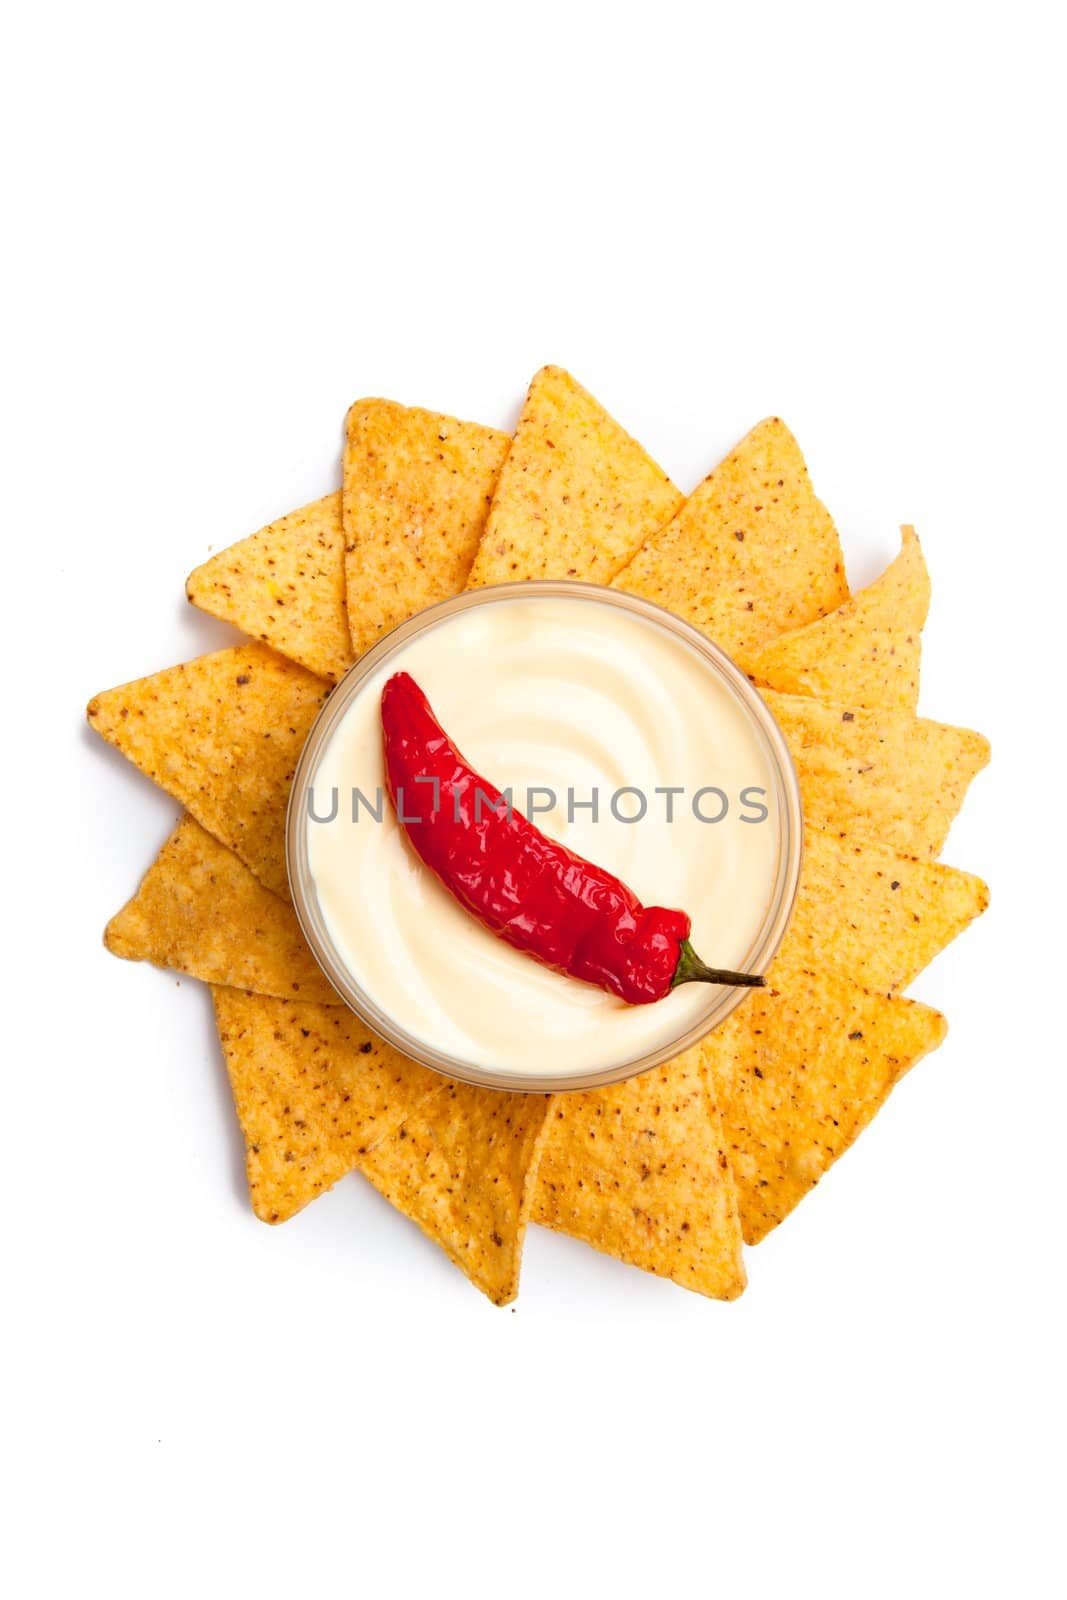 Pepper dipped into a bowl of white dip surrounded by nachos